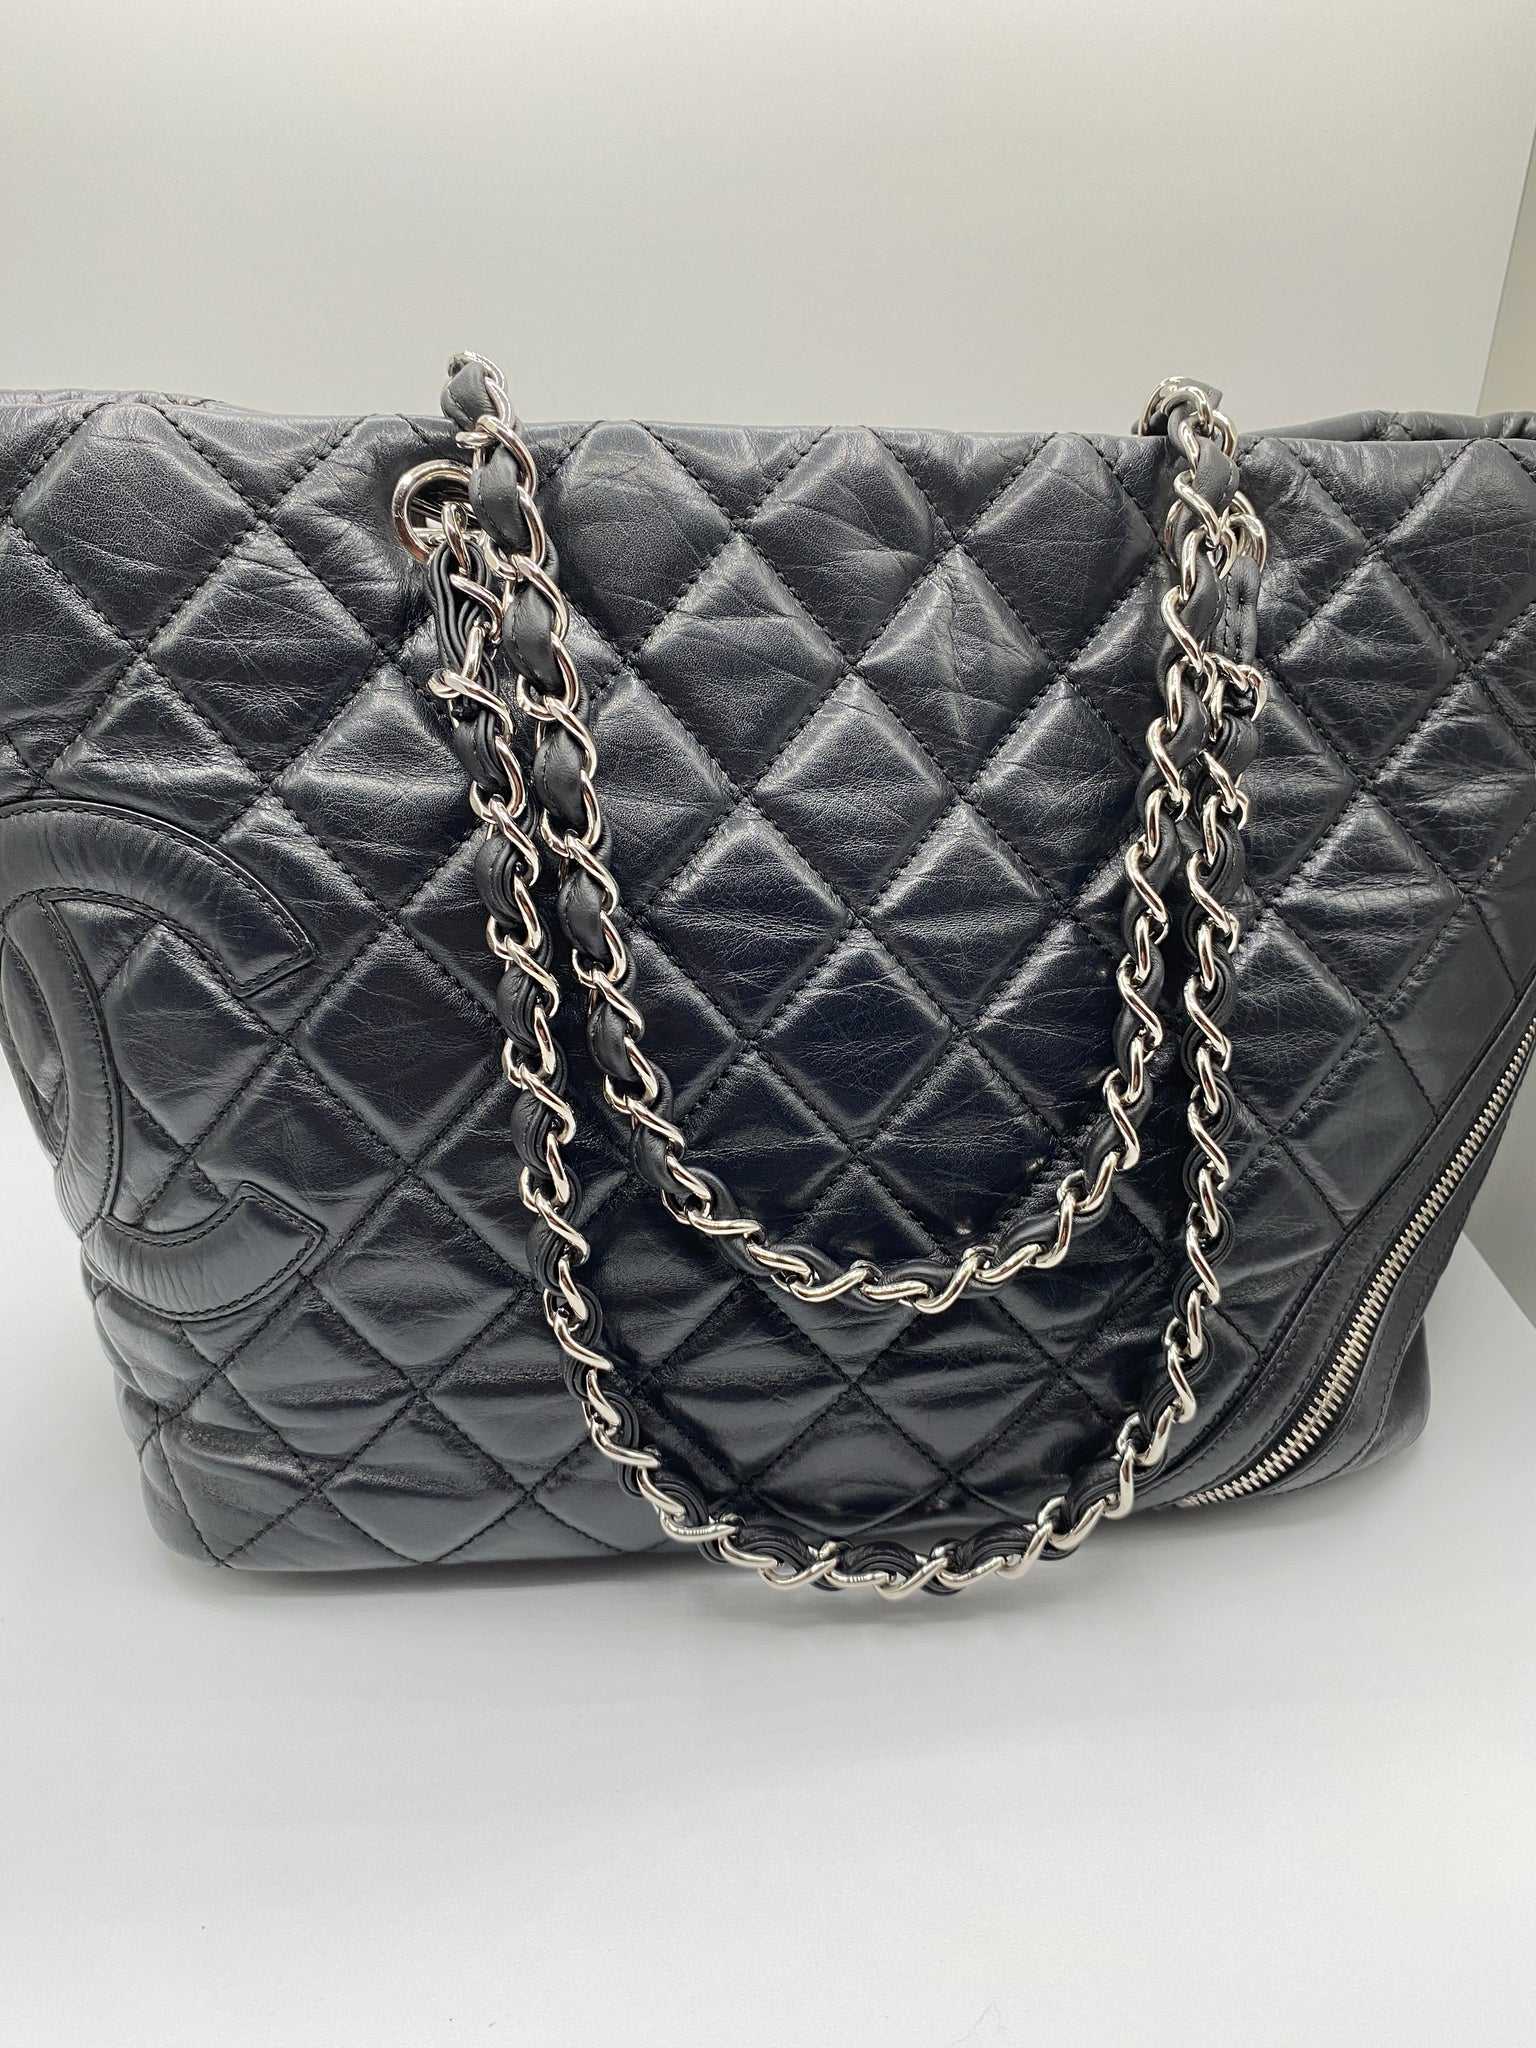 chanel bag large tote